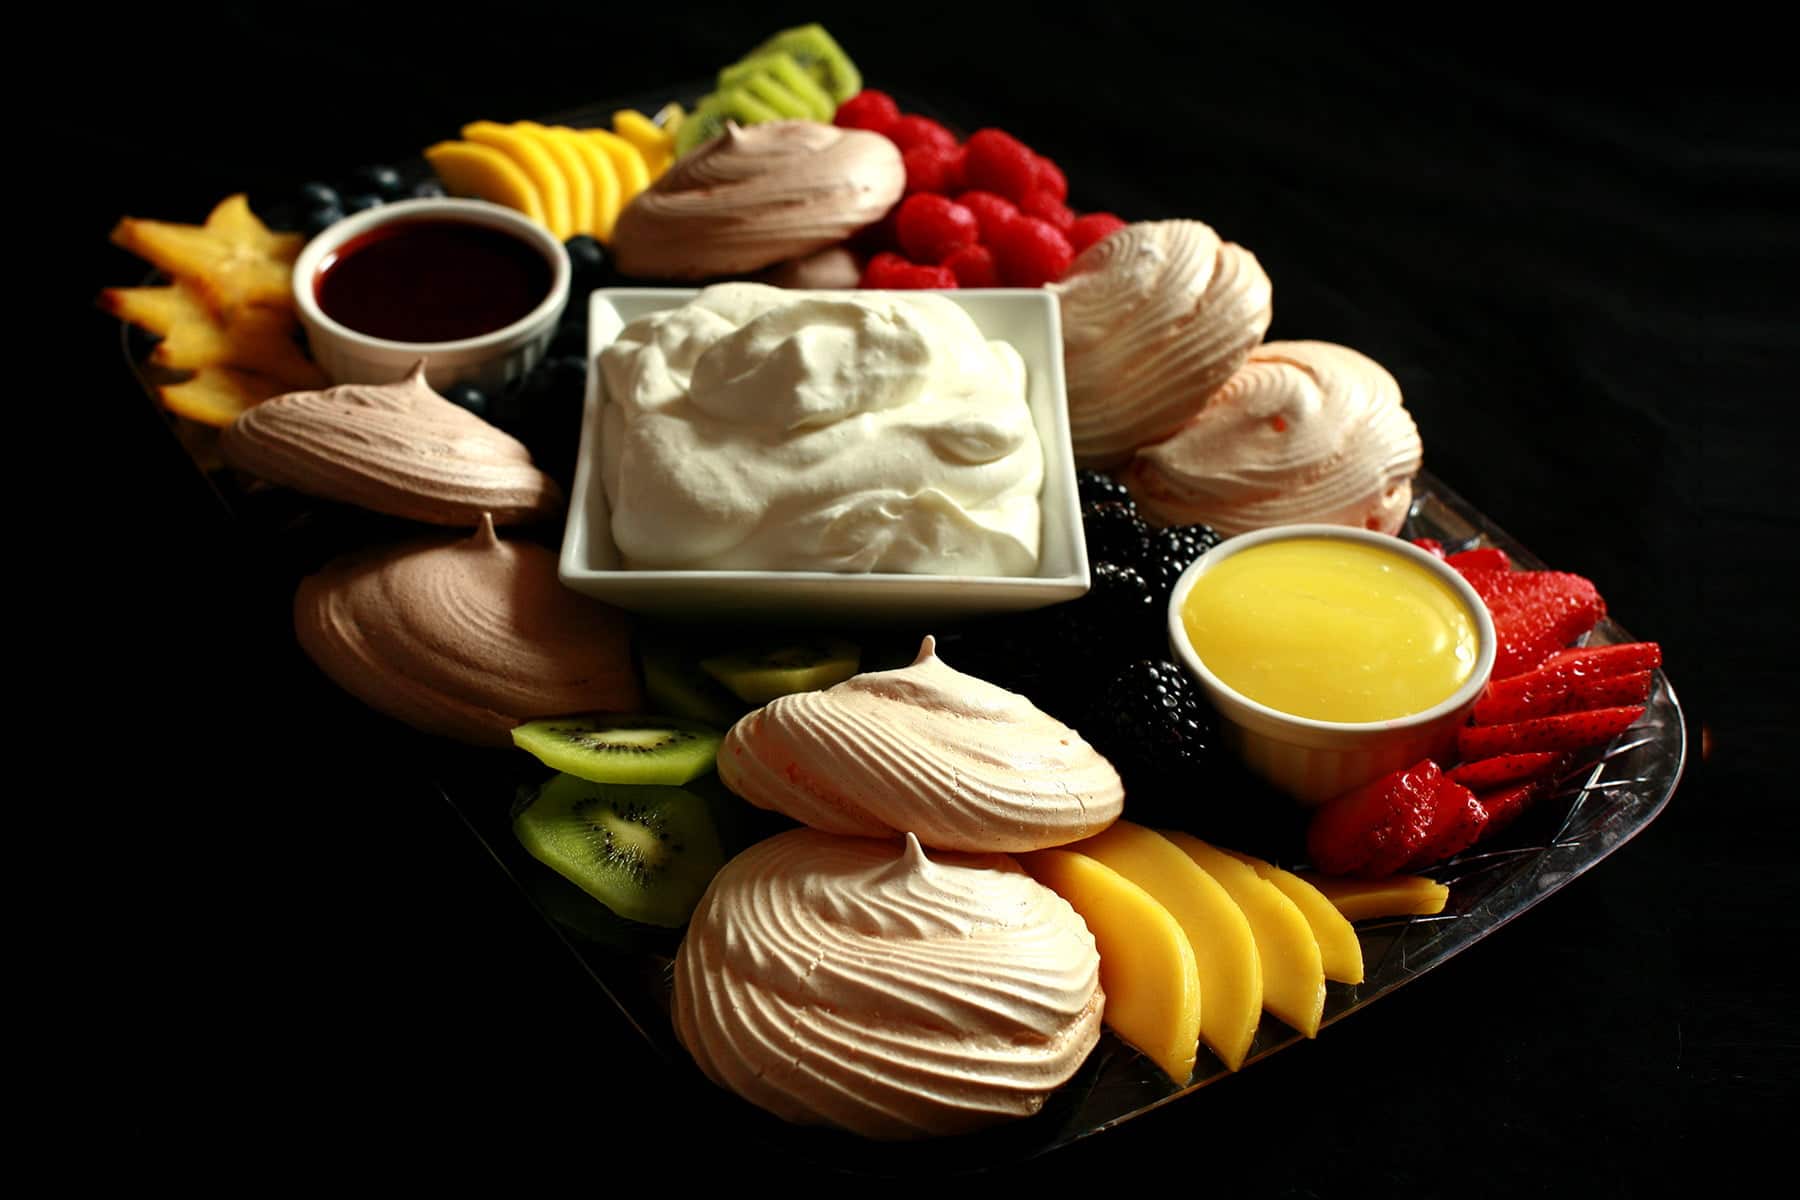 A pavlova dessert board, with mini pavlovas, fruit, curds, and whipped cream.